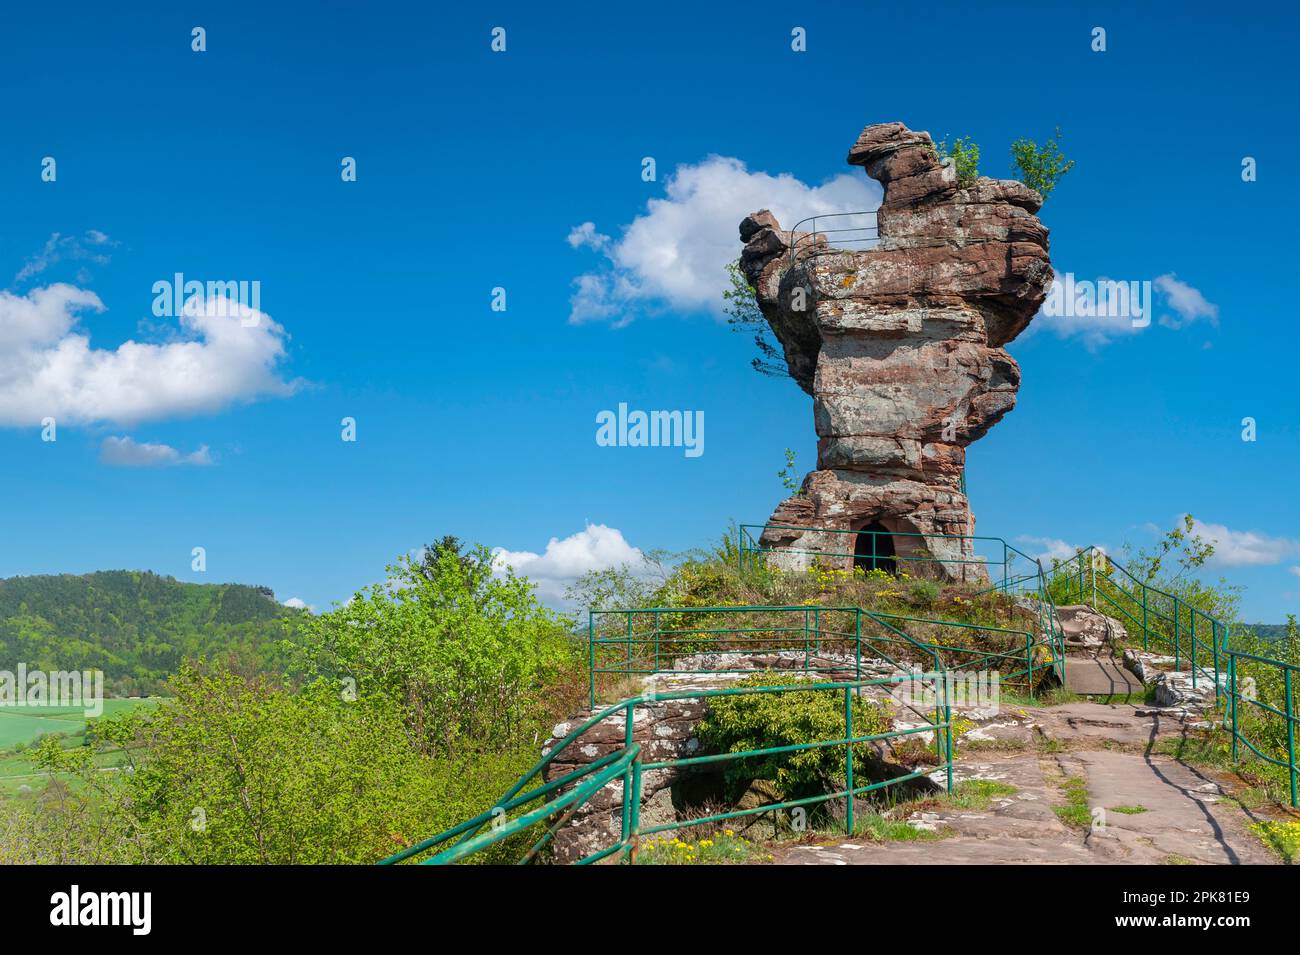 Keep of the Drachenfels castle ruins, popularly known as molar tooth., Busenberg, Palatinate, Rhineland-Palatinate, Germany, Europe Stock Photo